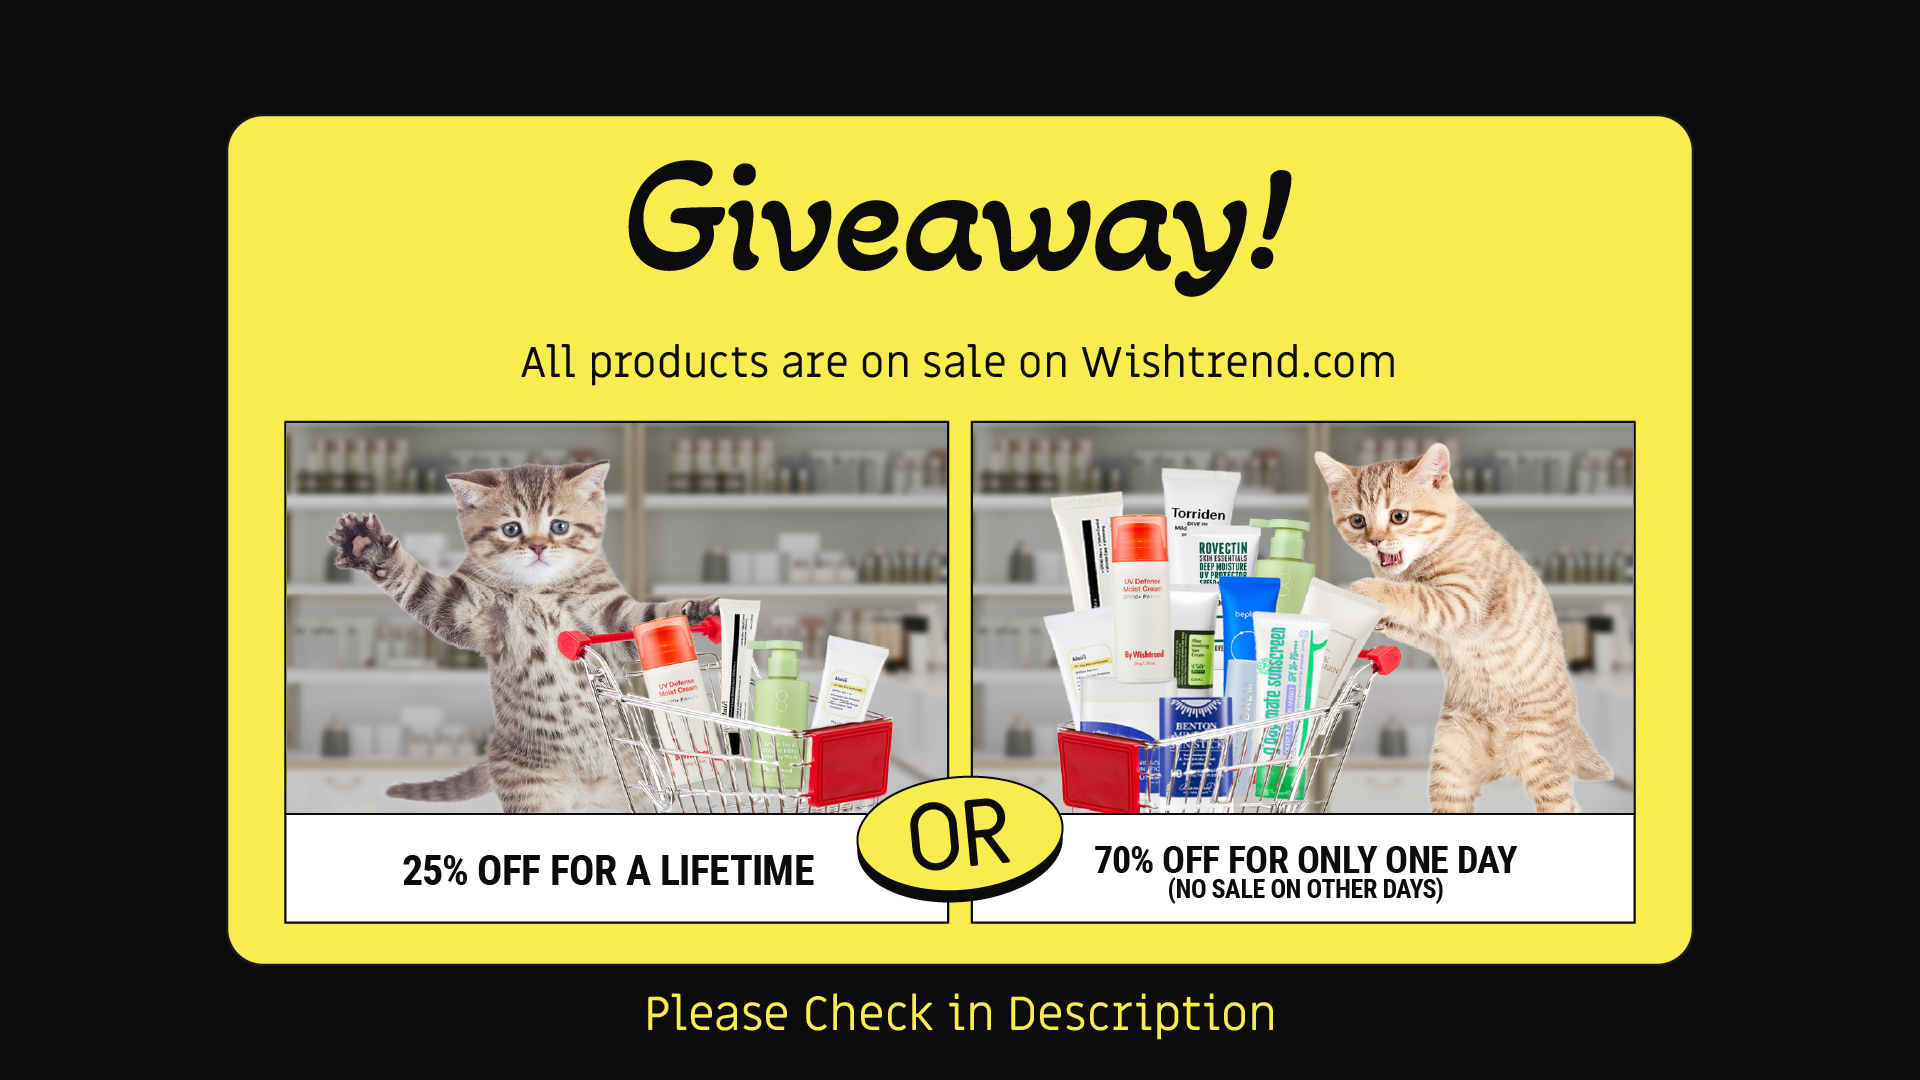 [Wish You Could Choose One] All products are on sale on Wishtrend.com, would your rather…